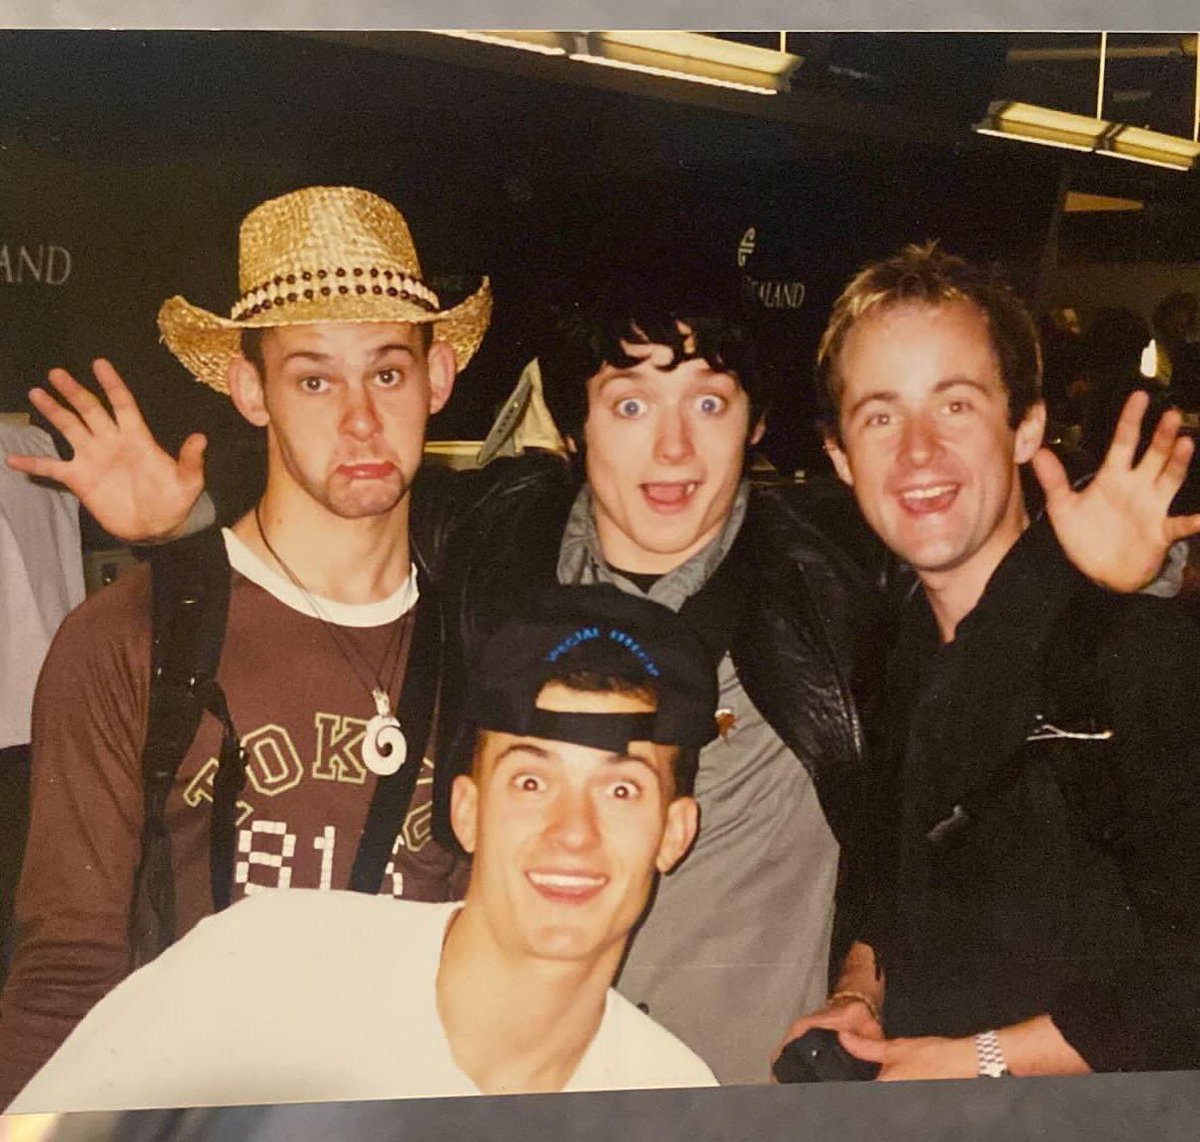 The Lord of the Rings cast shared a fun flashback photo. nerdist.com/article/the-lo…